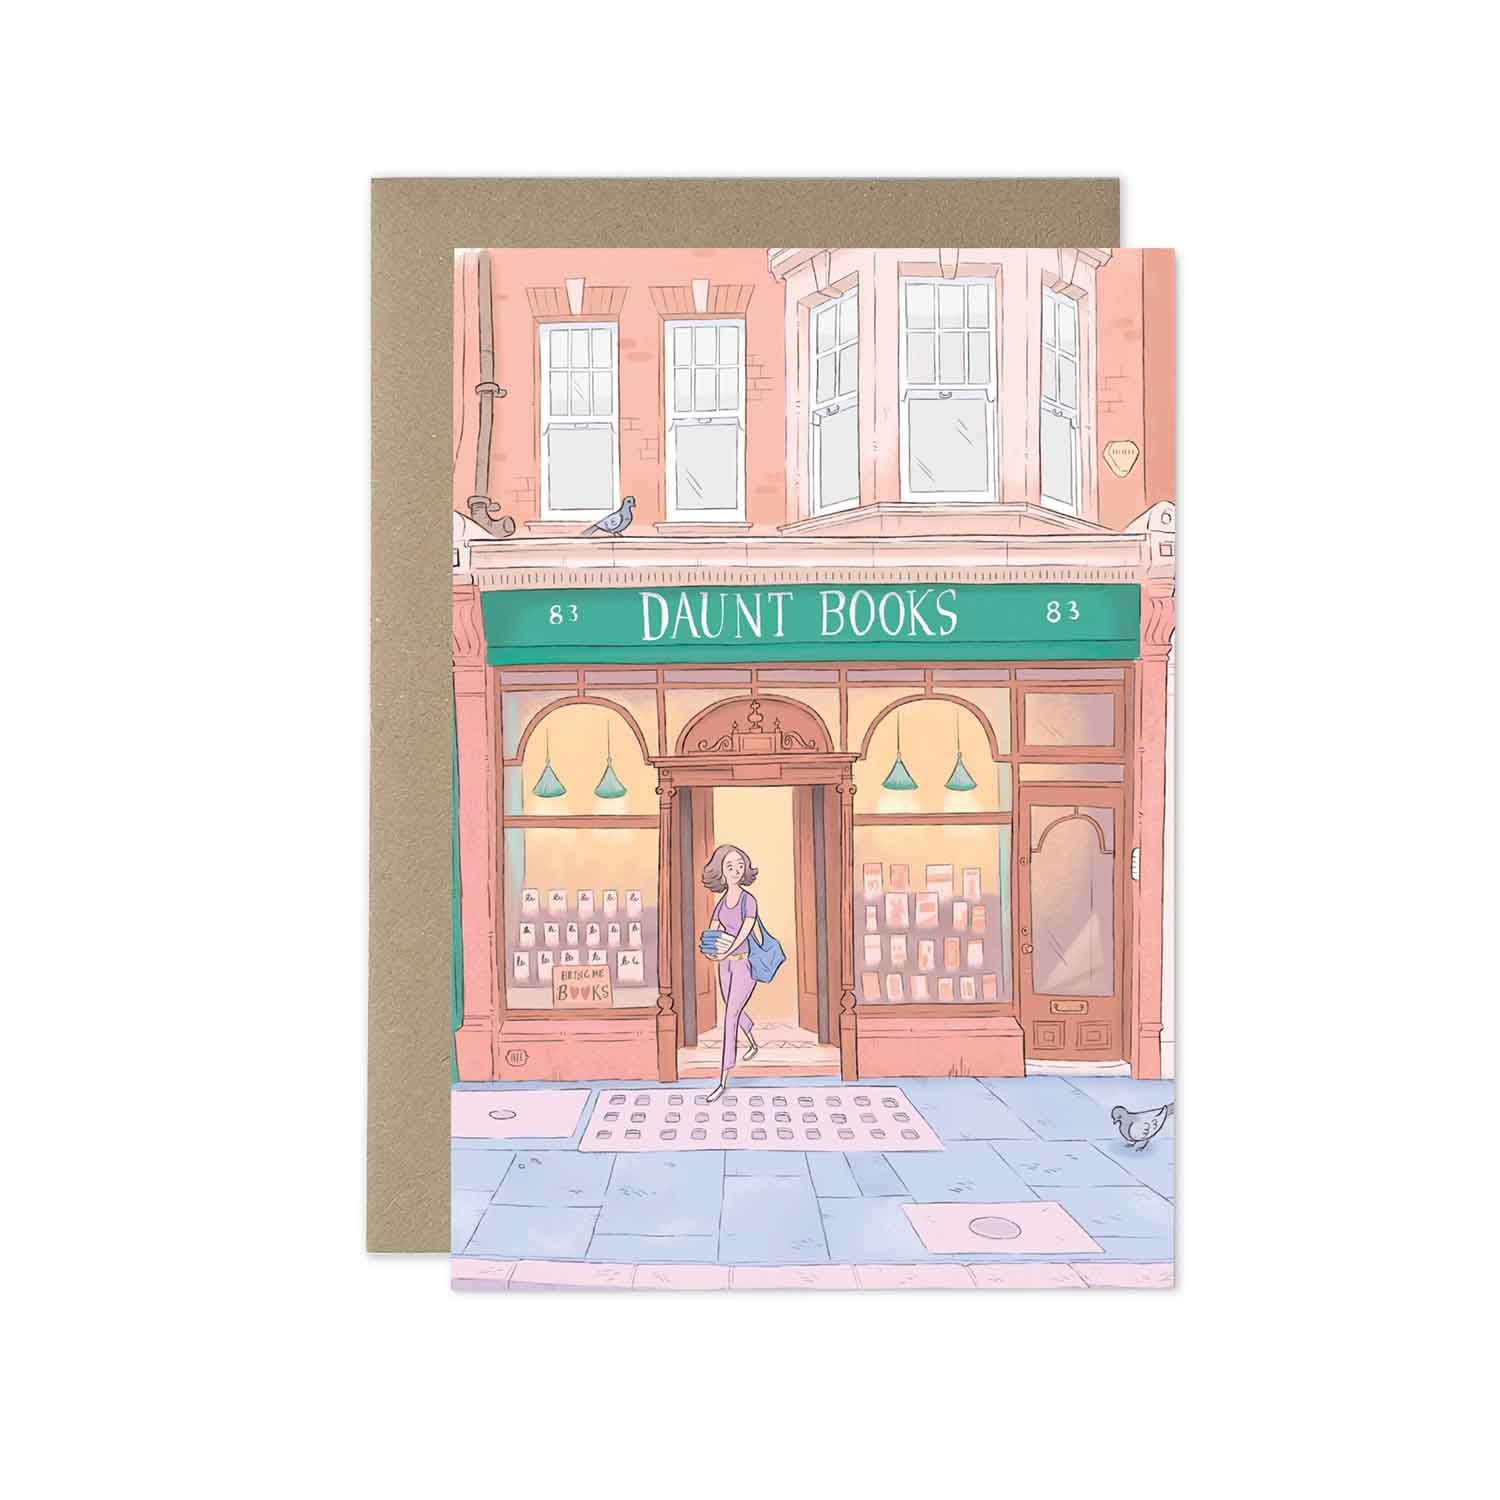 London's Daunt Books beautifully illustrated on a greeting card by mike green illustration.